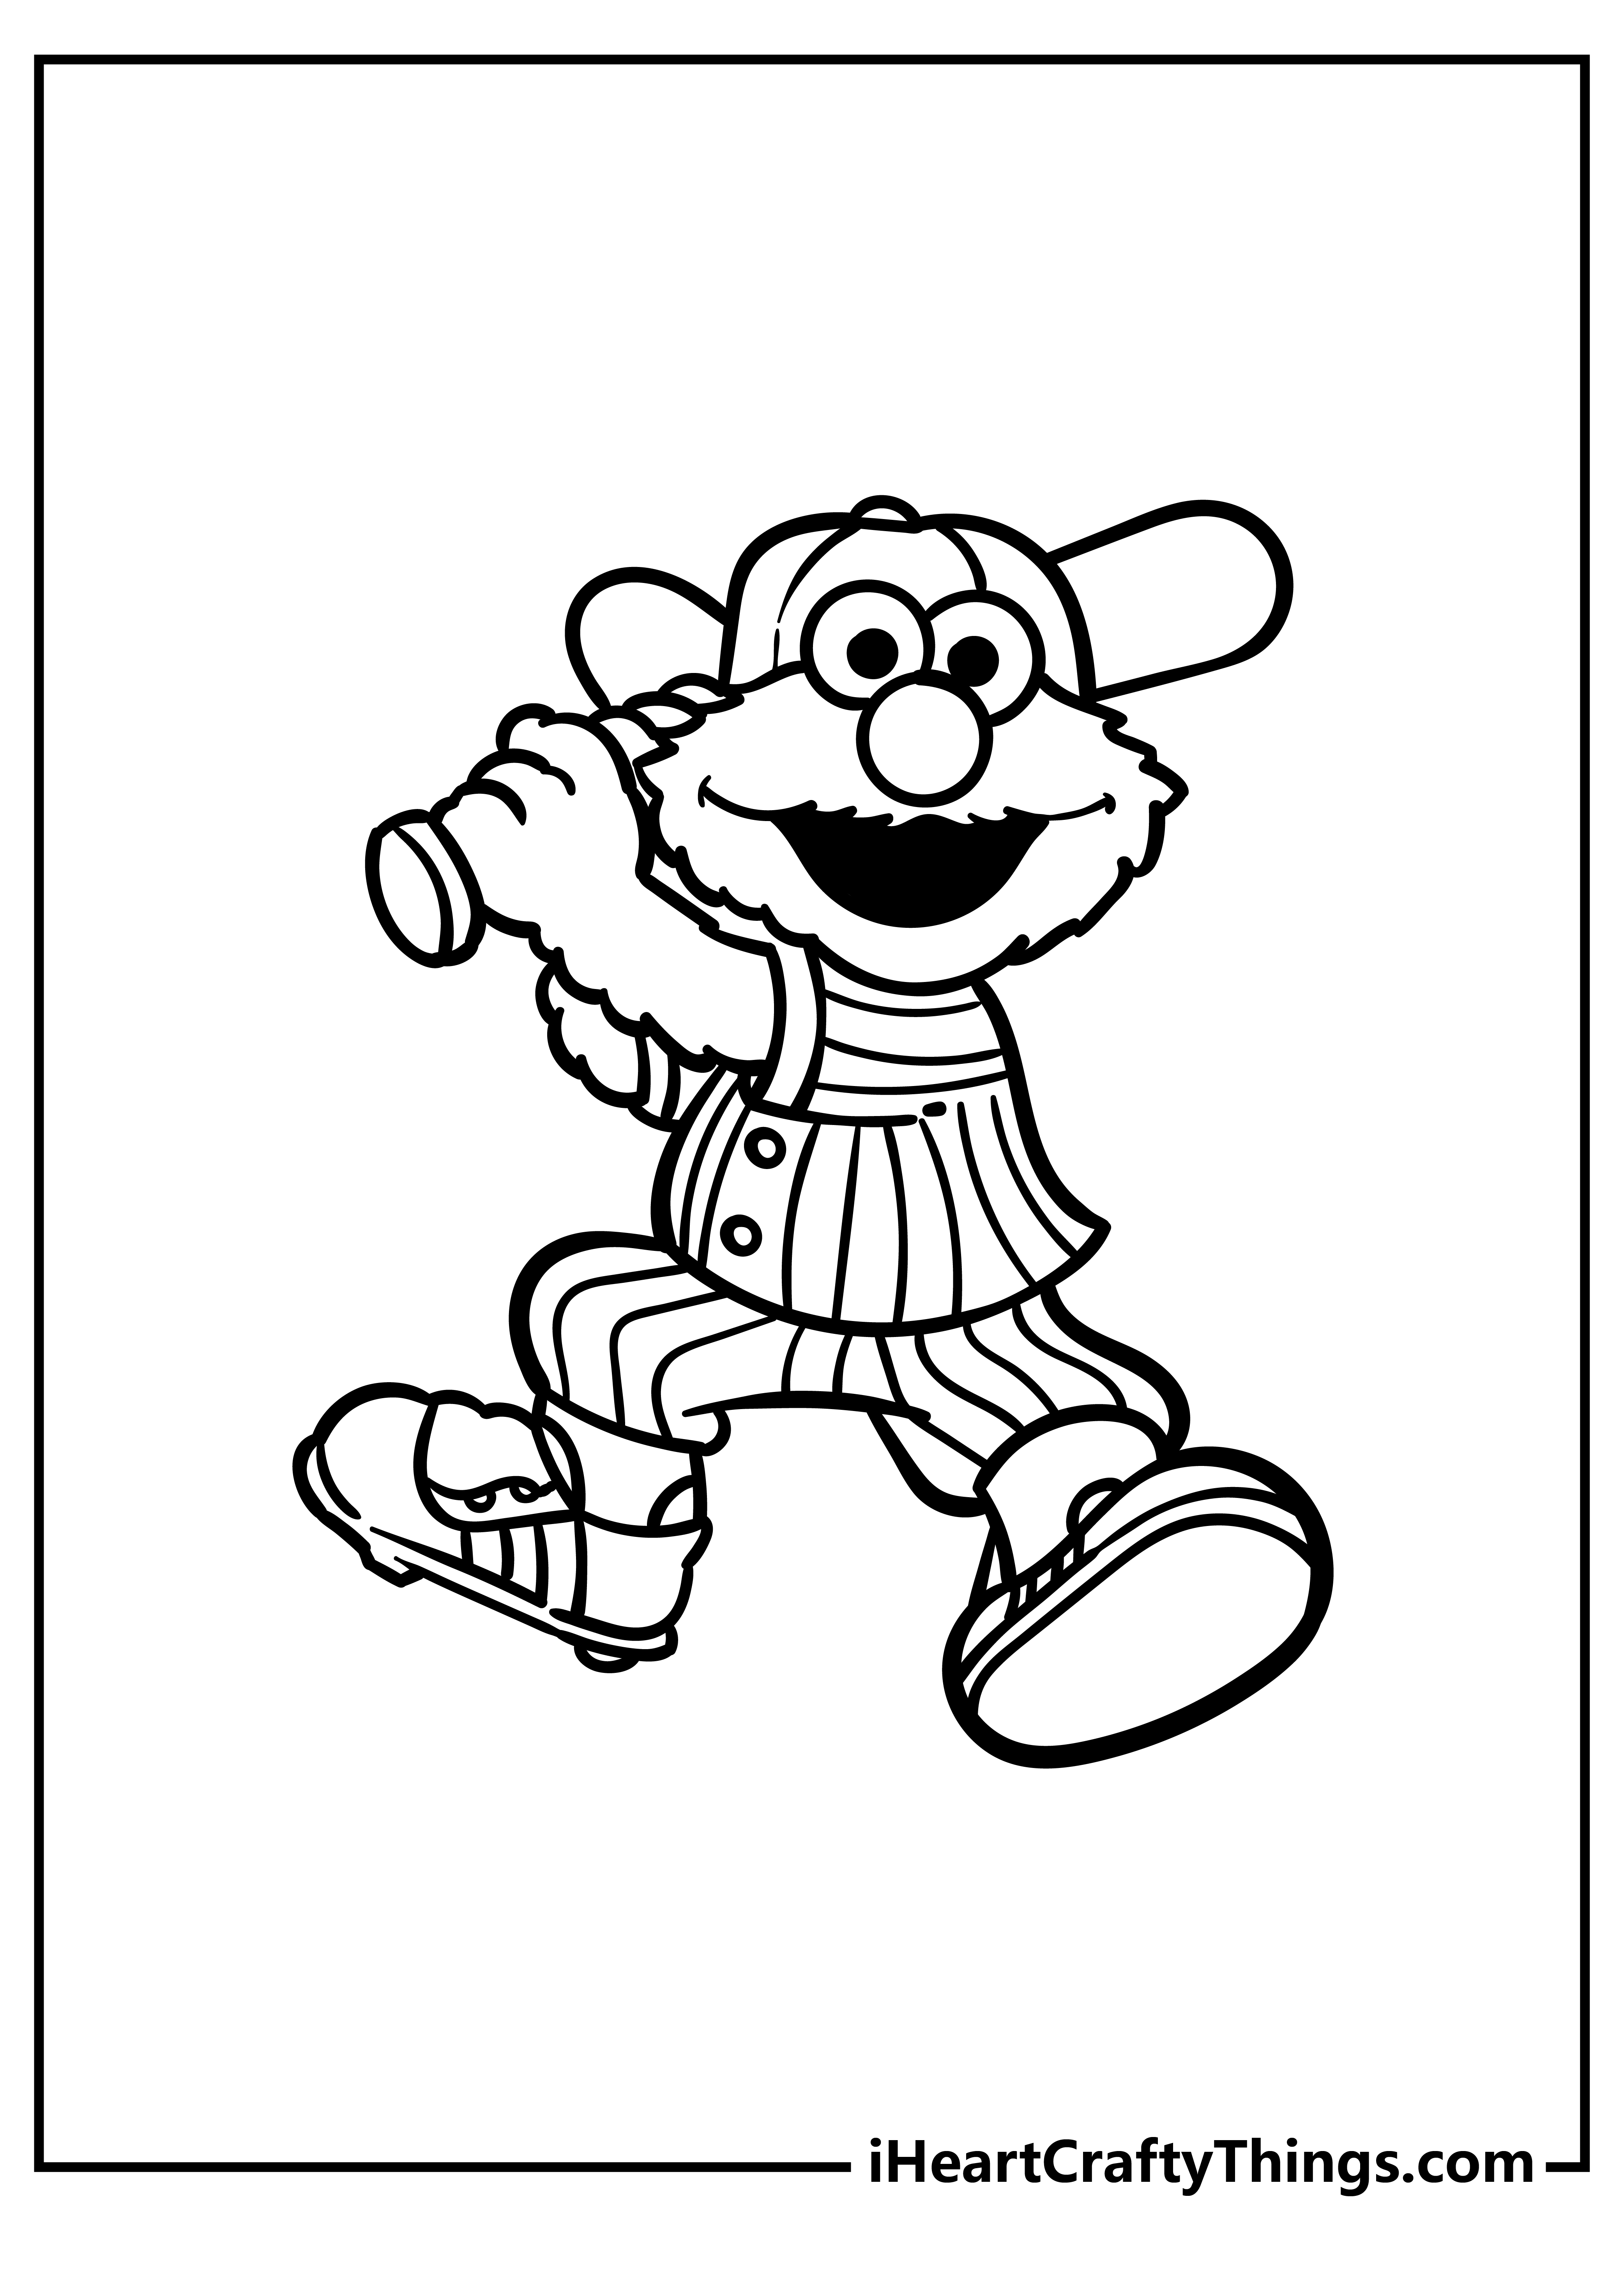 Elmo Coloring Pages free pdf download